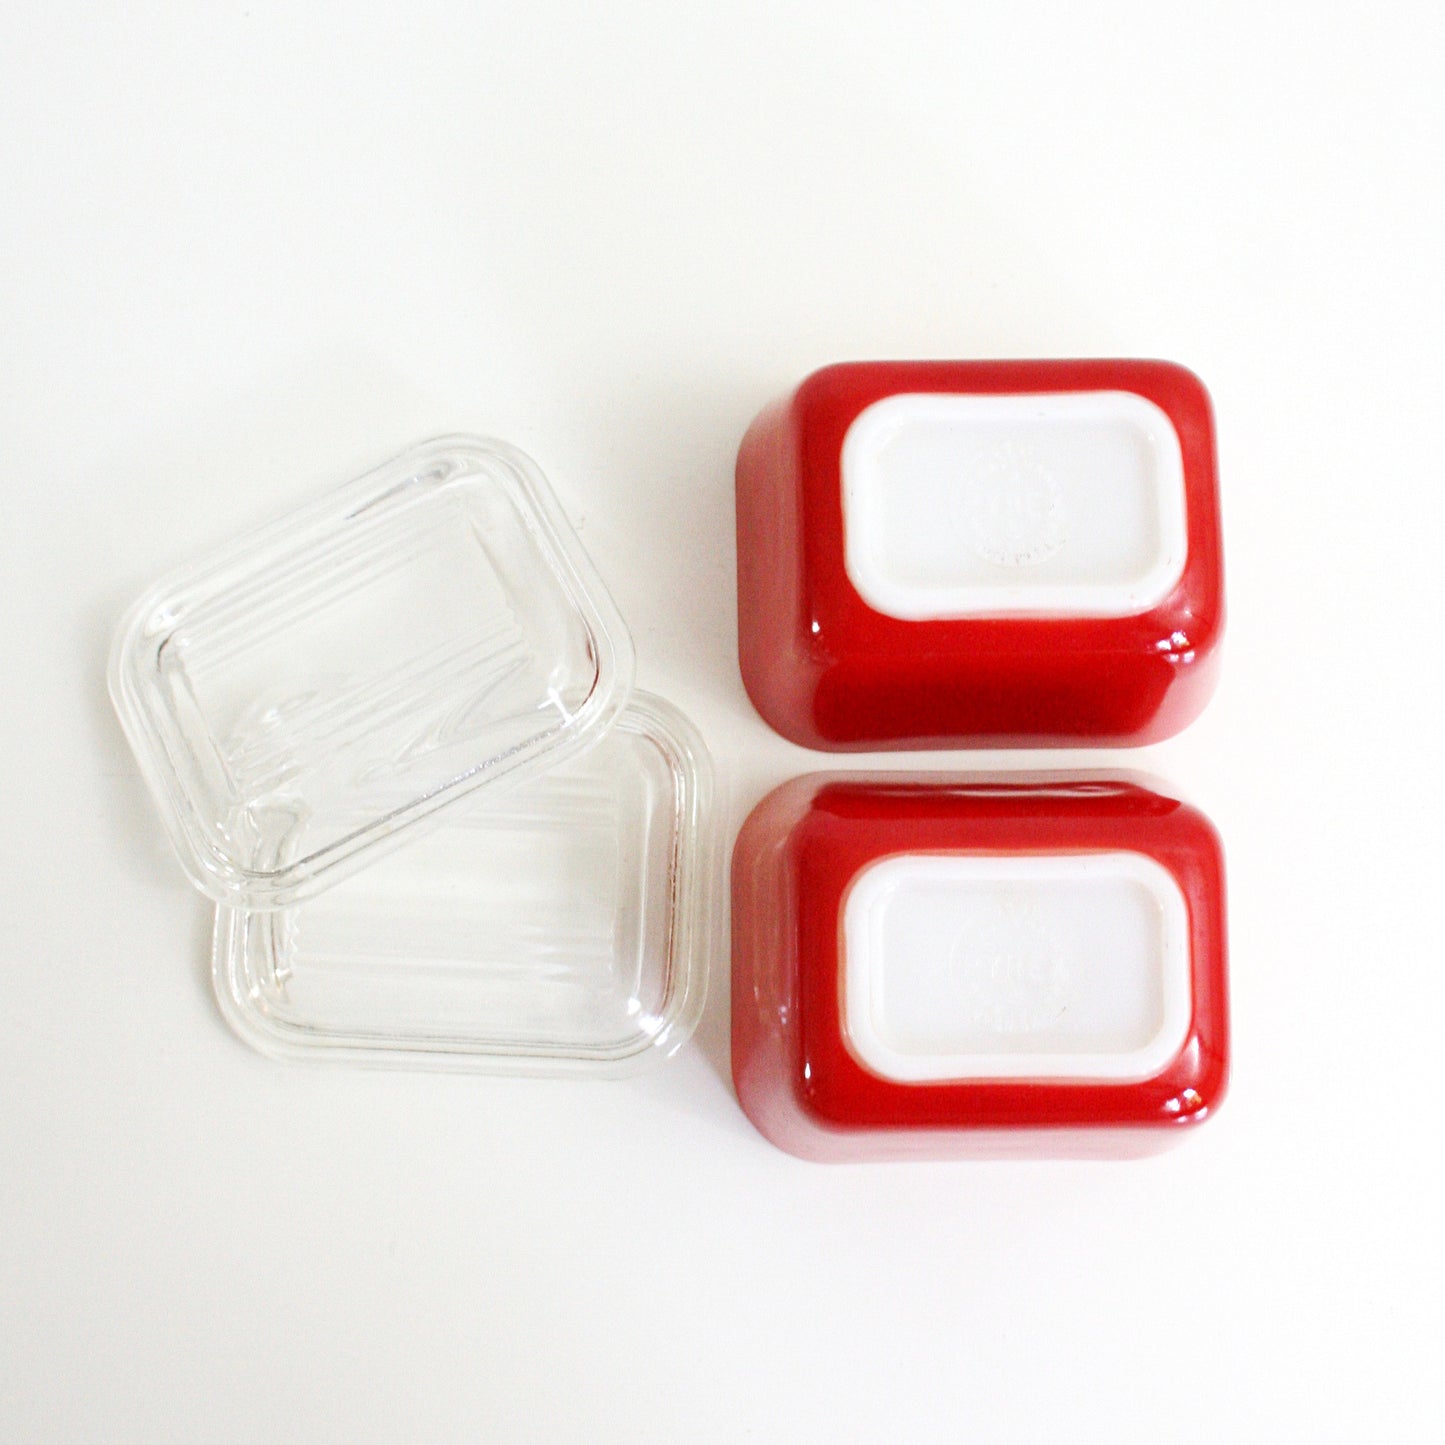 SOLD - Vintage Pair of Red Pyrex Refrigerator Dishes / Vintage Red Pyrex Space Savers